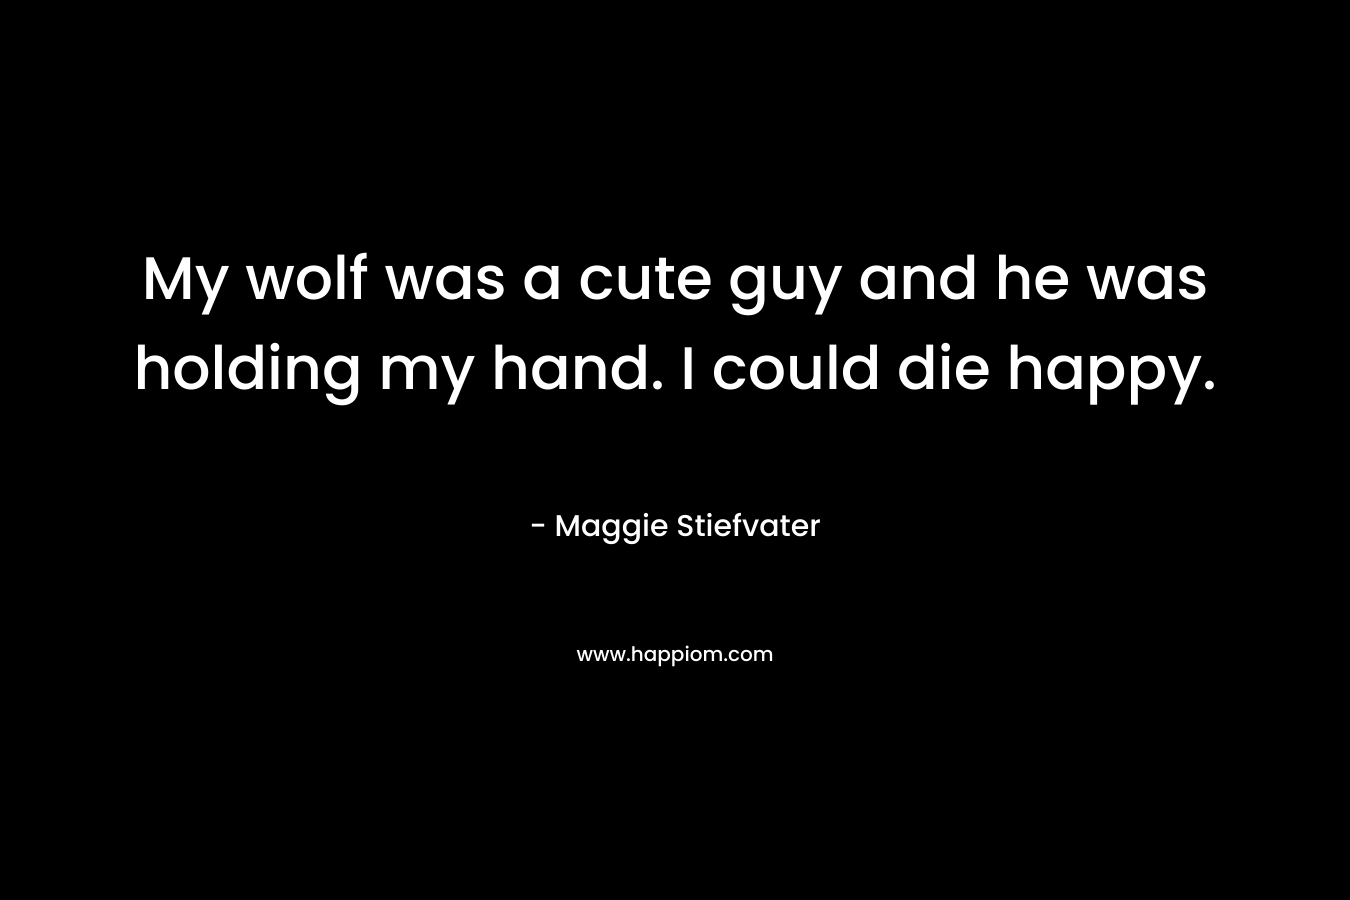 My wolf was a cute guy and he was holding my hand. I could die happy.